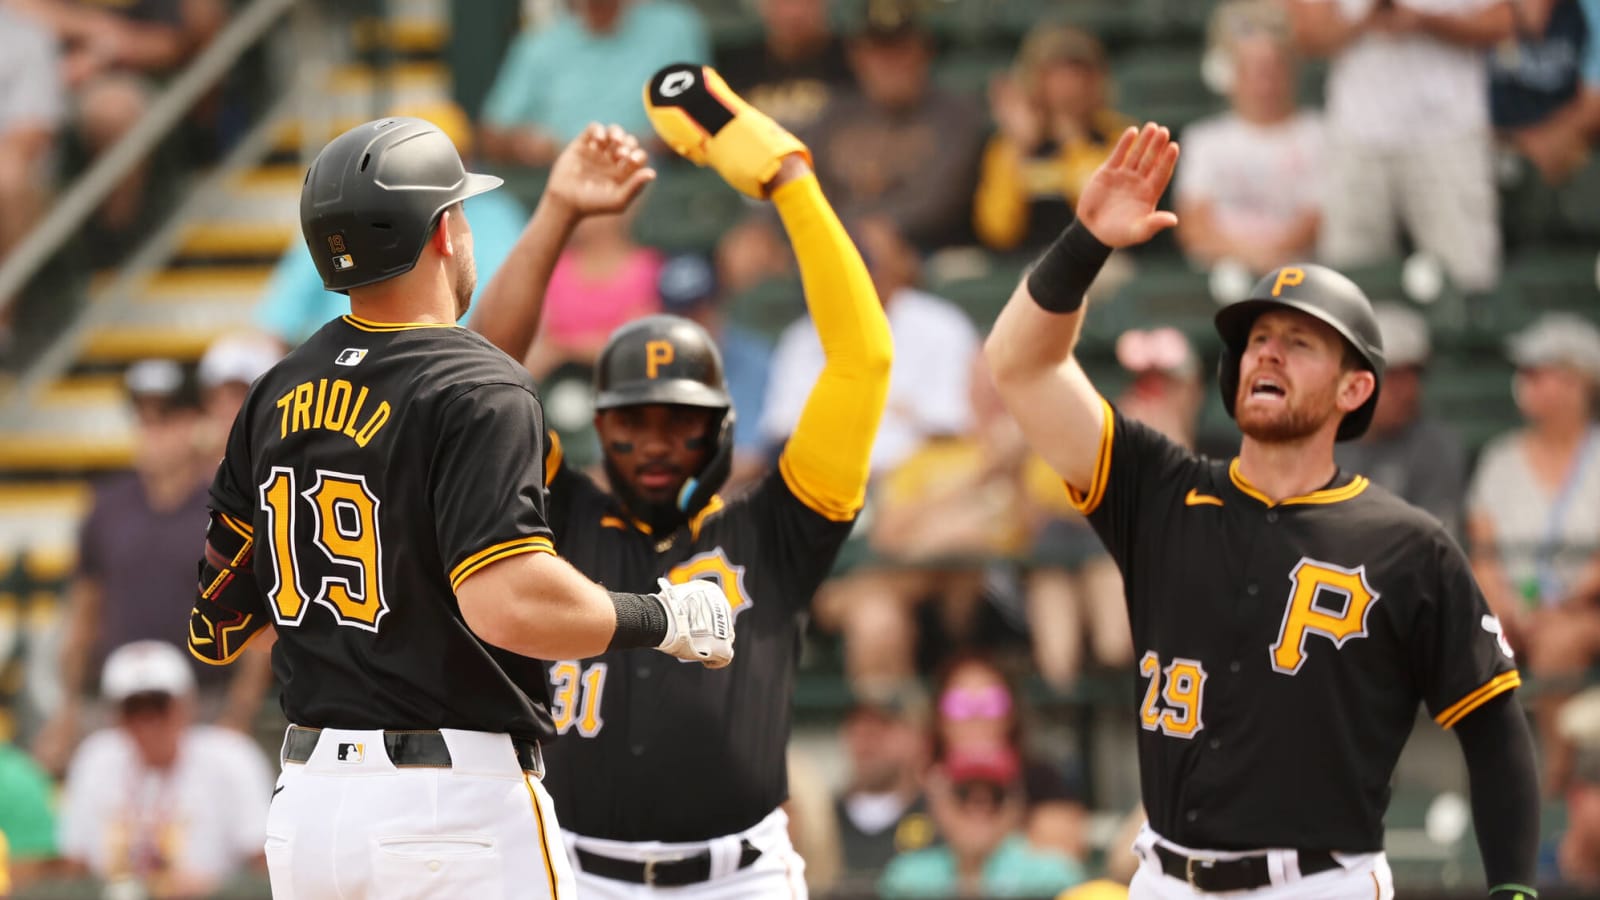 Pirates Spring Game Recap: Home Run Barrage Continues in Win Over Rays